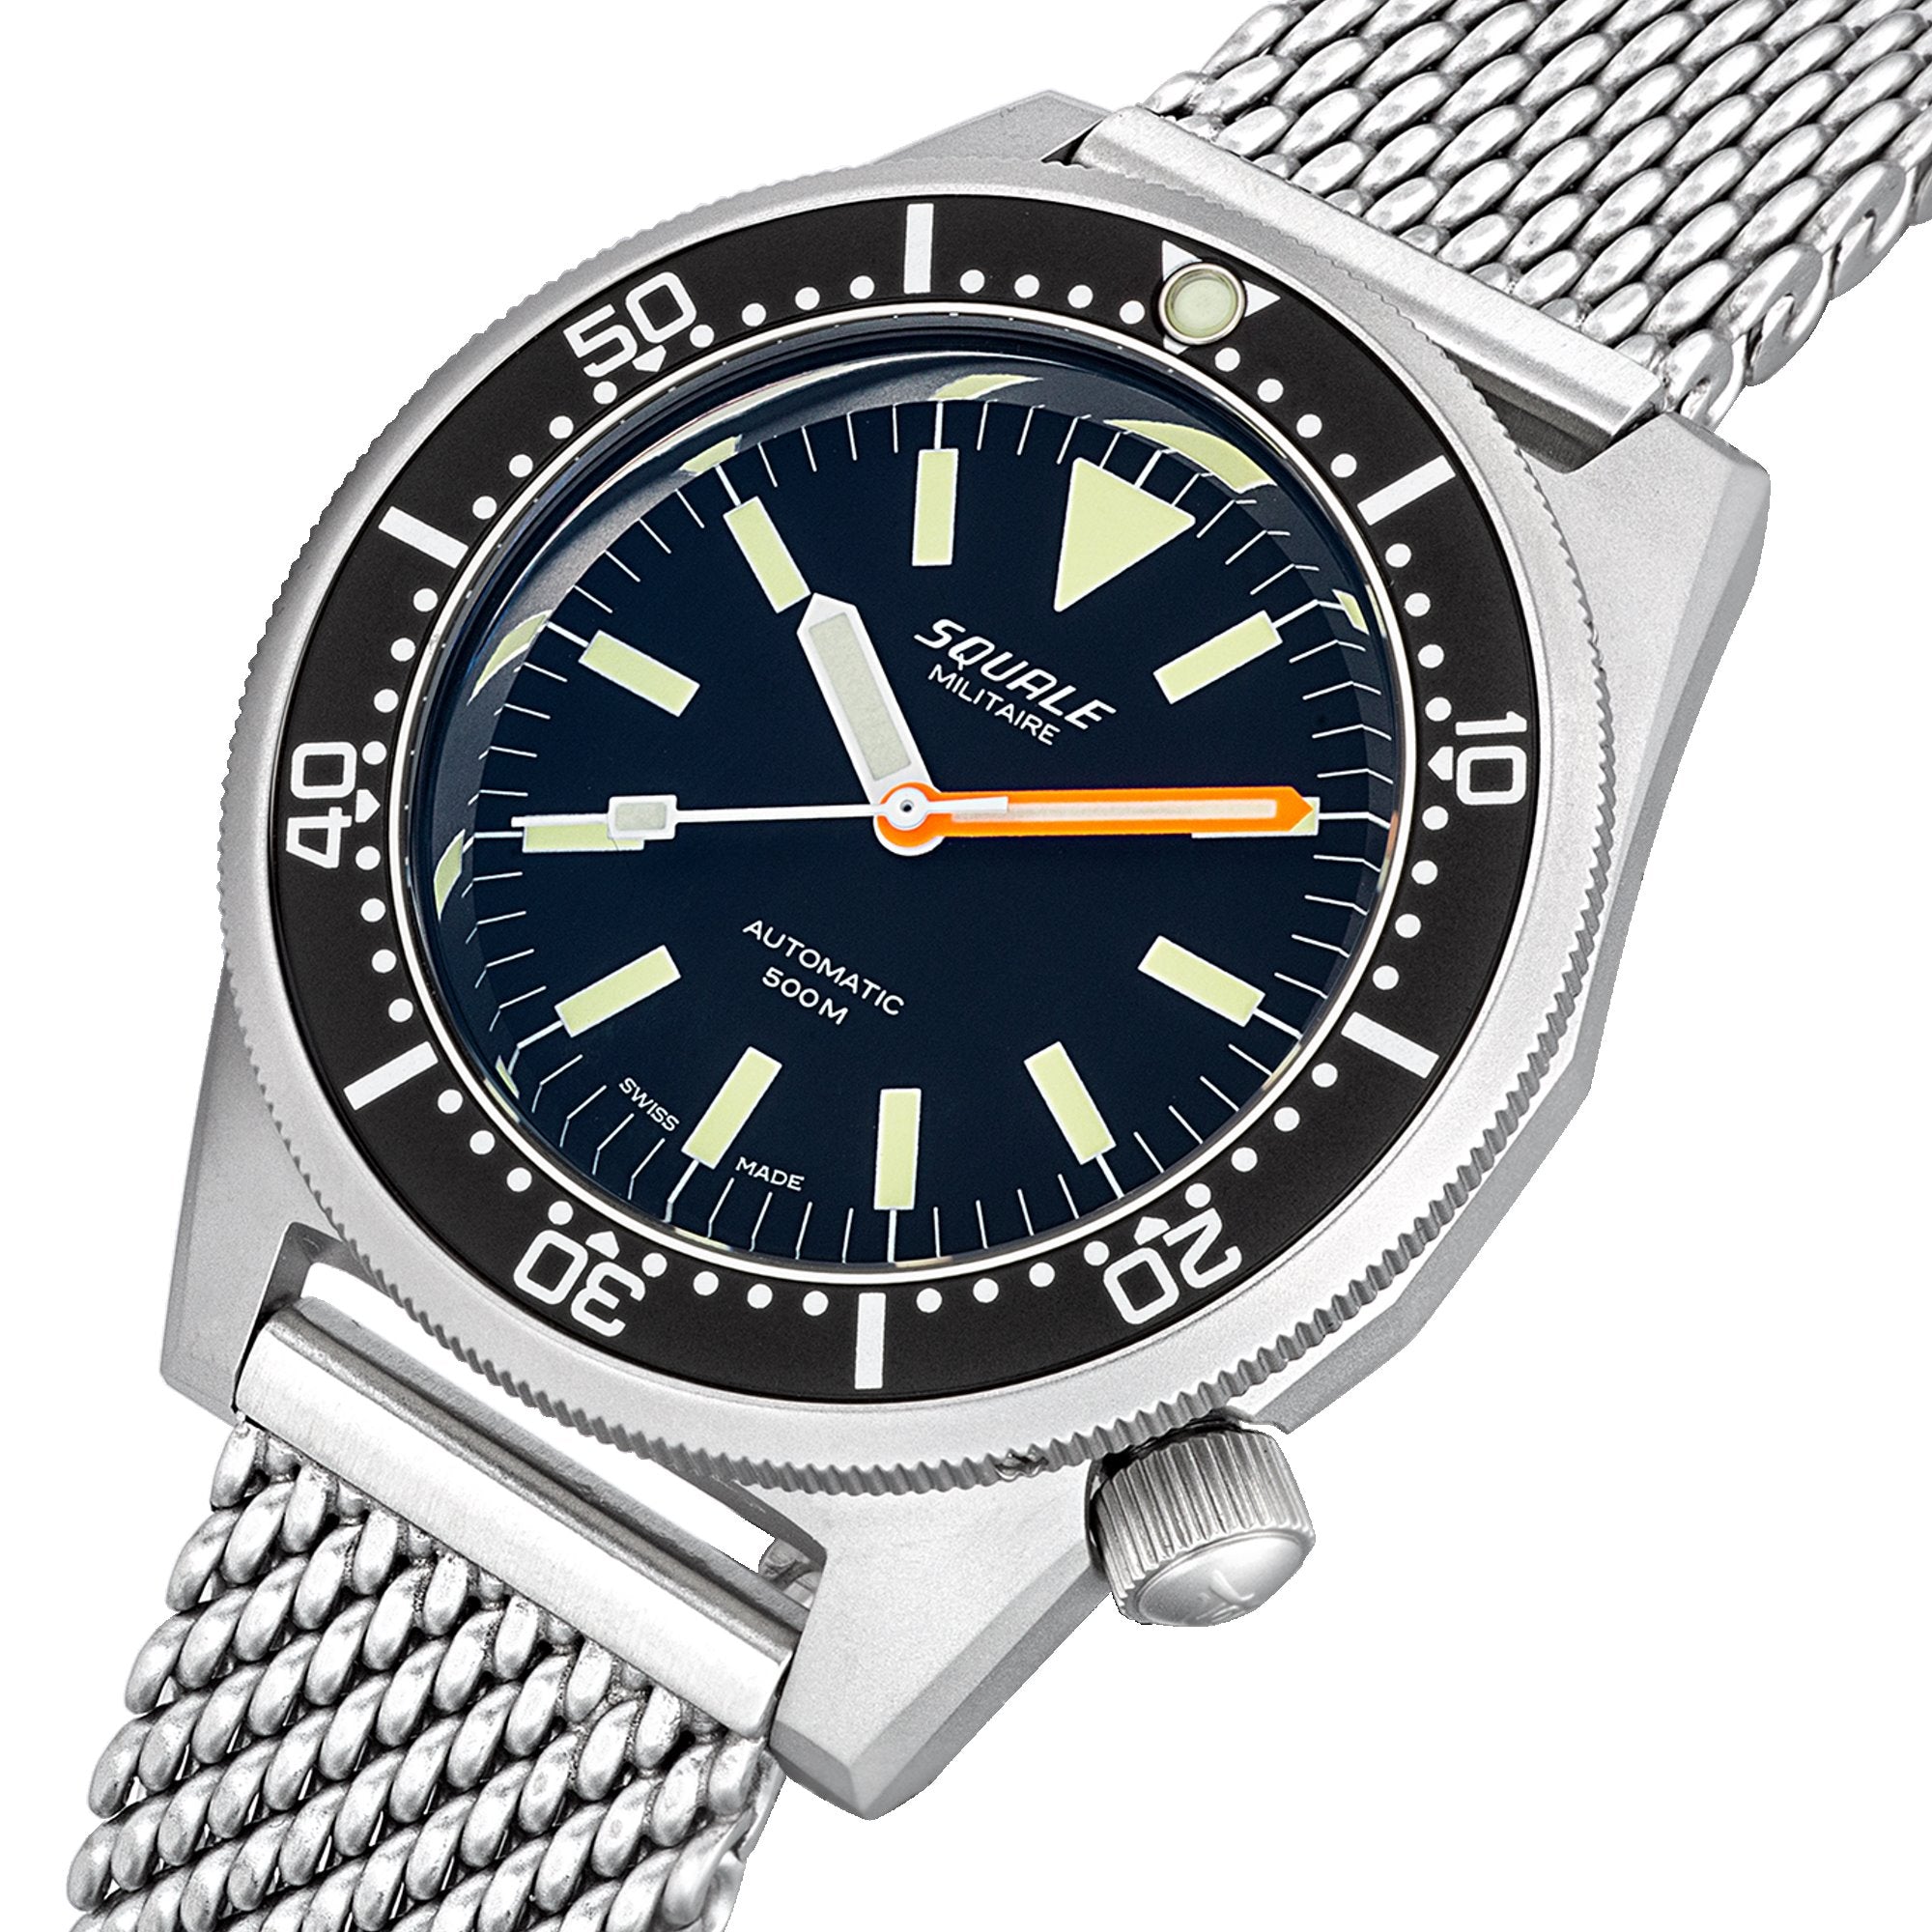 SQUALE 1521 - Militaire Blasted Mesh